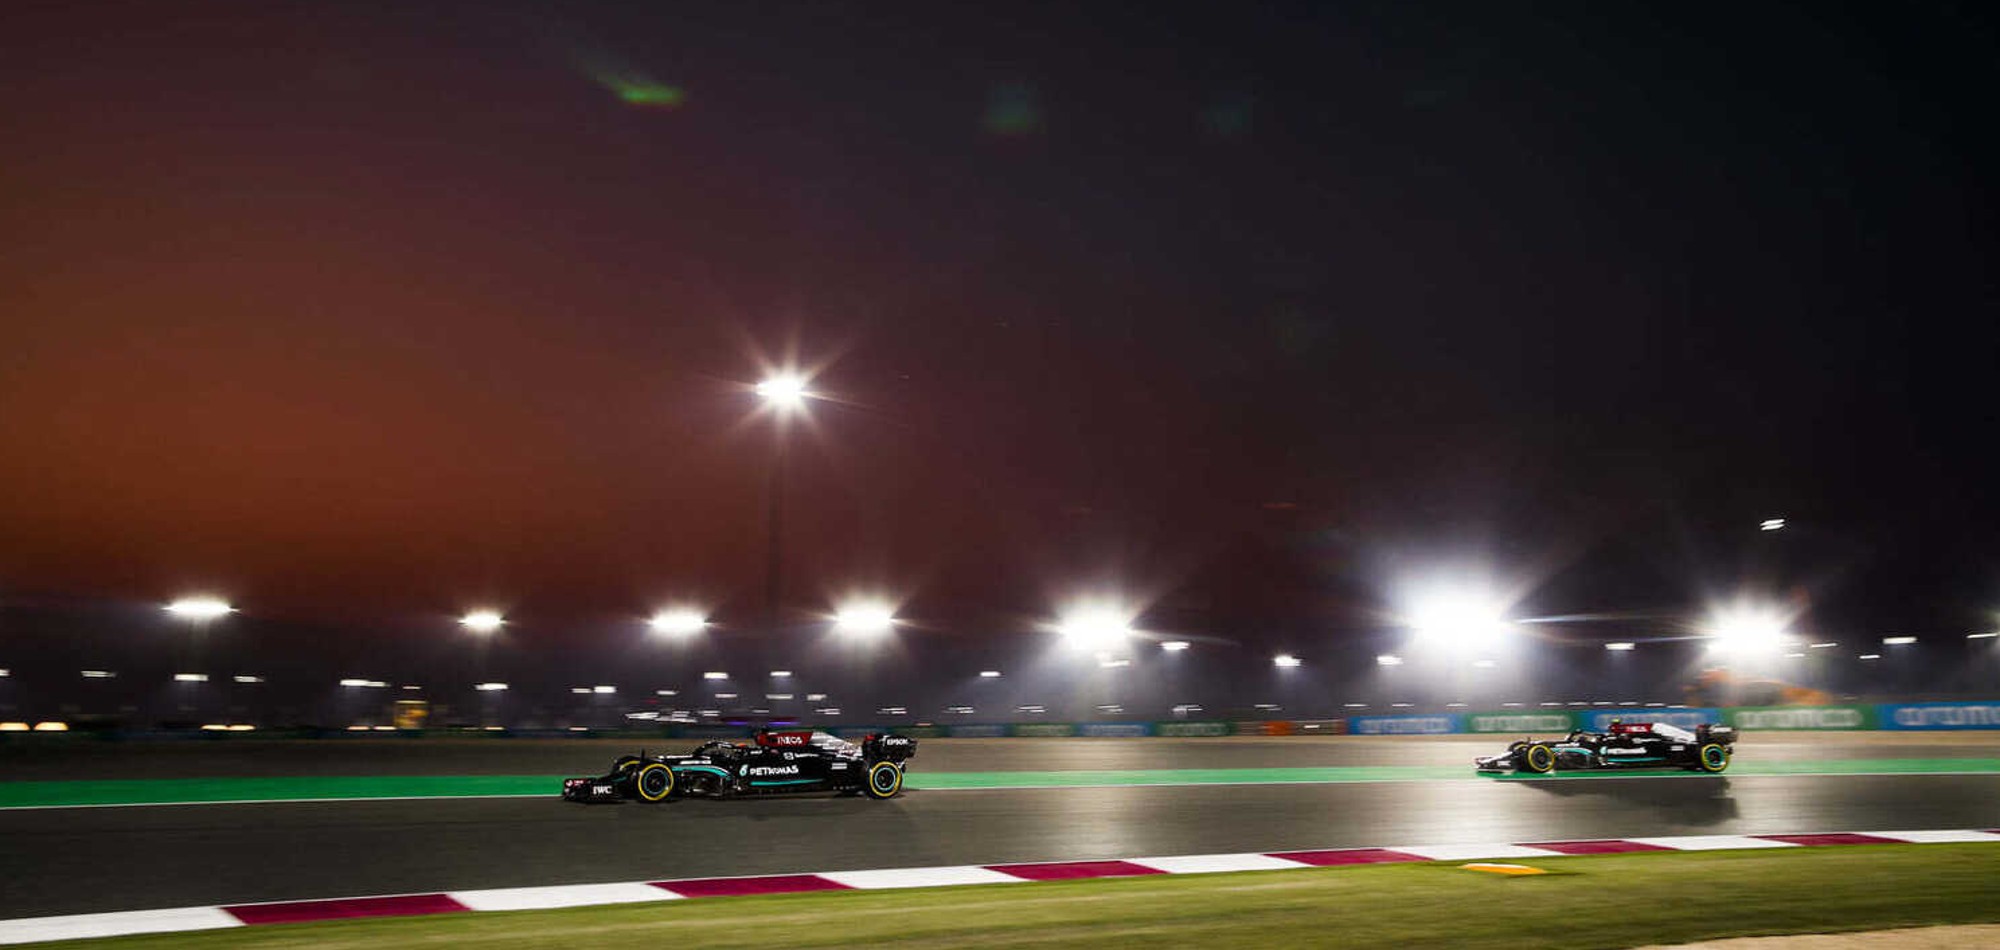 Over 80,000 fans celebrate as Qatar delivers riveting F1 race weekend